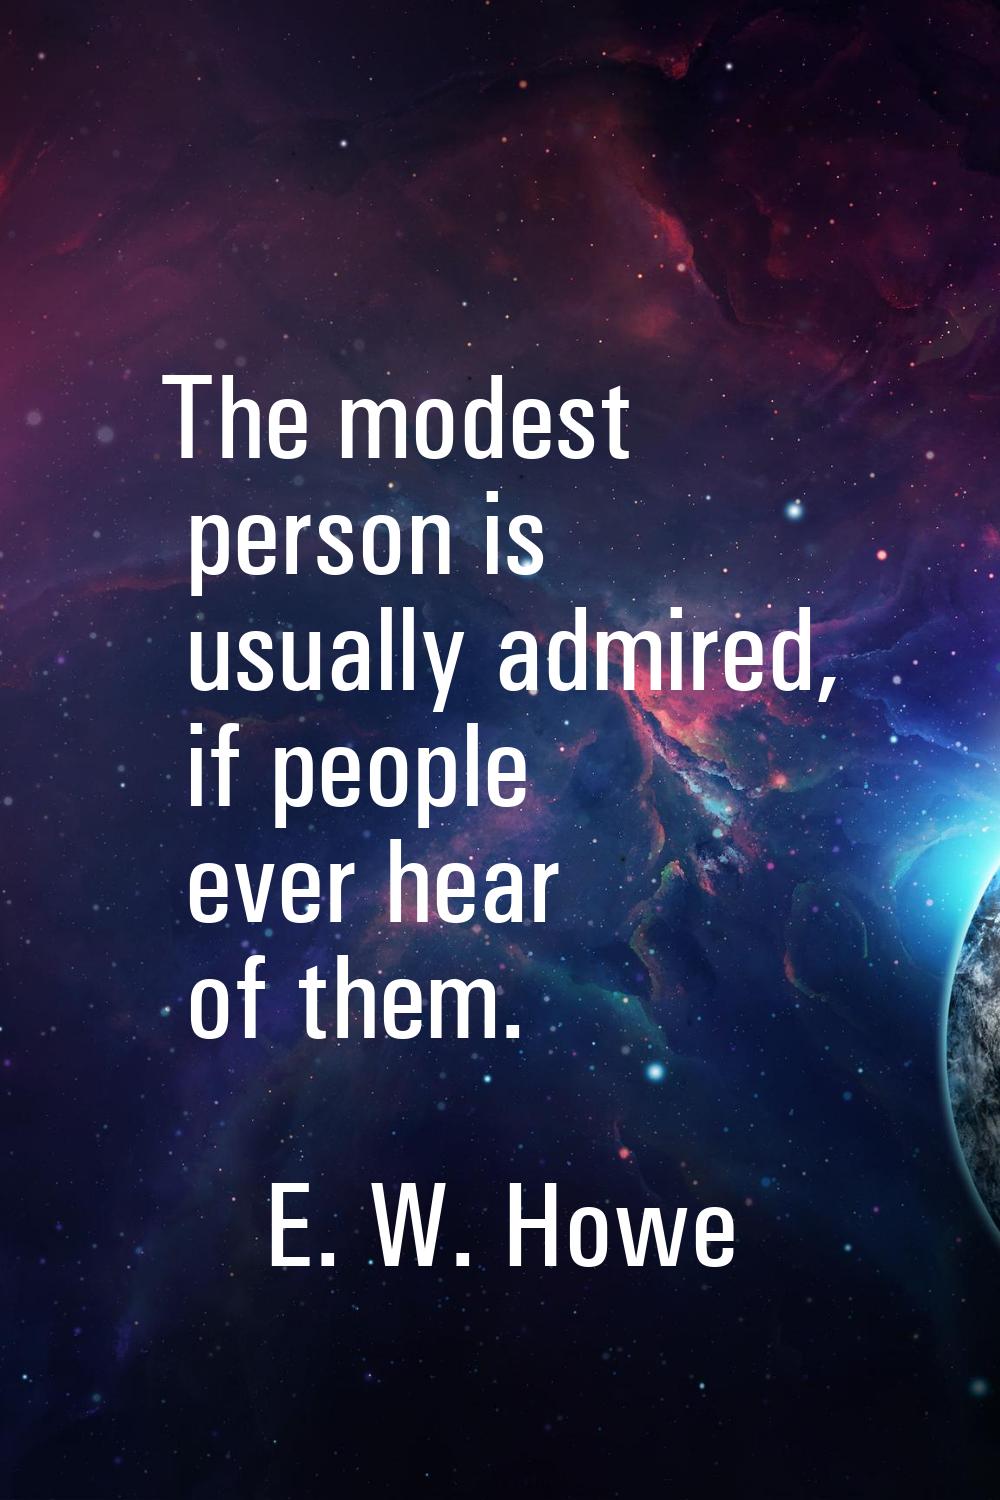 The modest person is usually admired, if people ever hear of them.